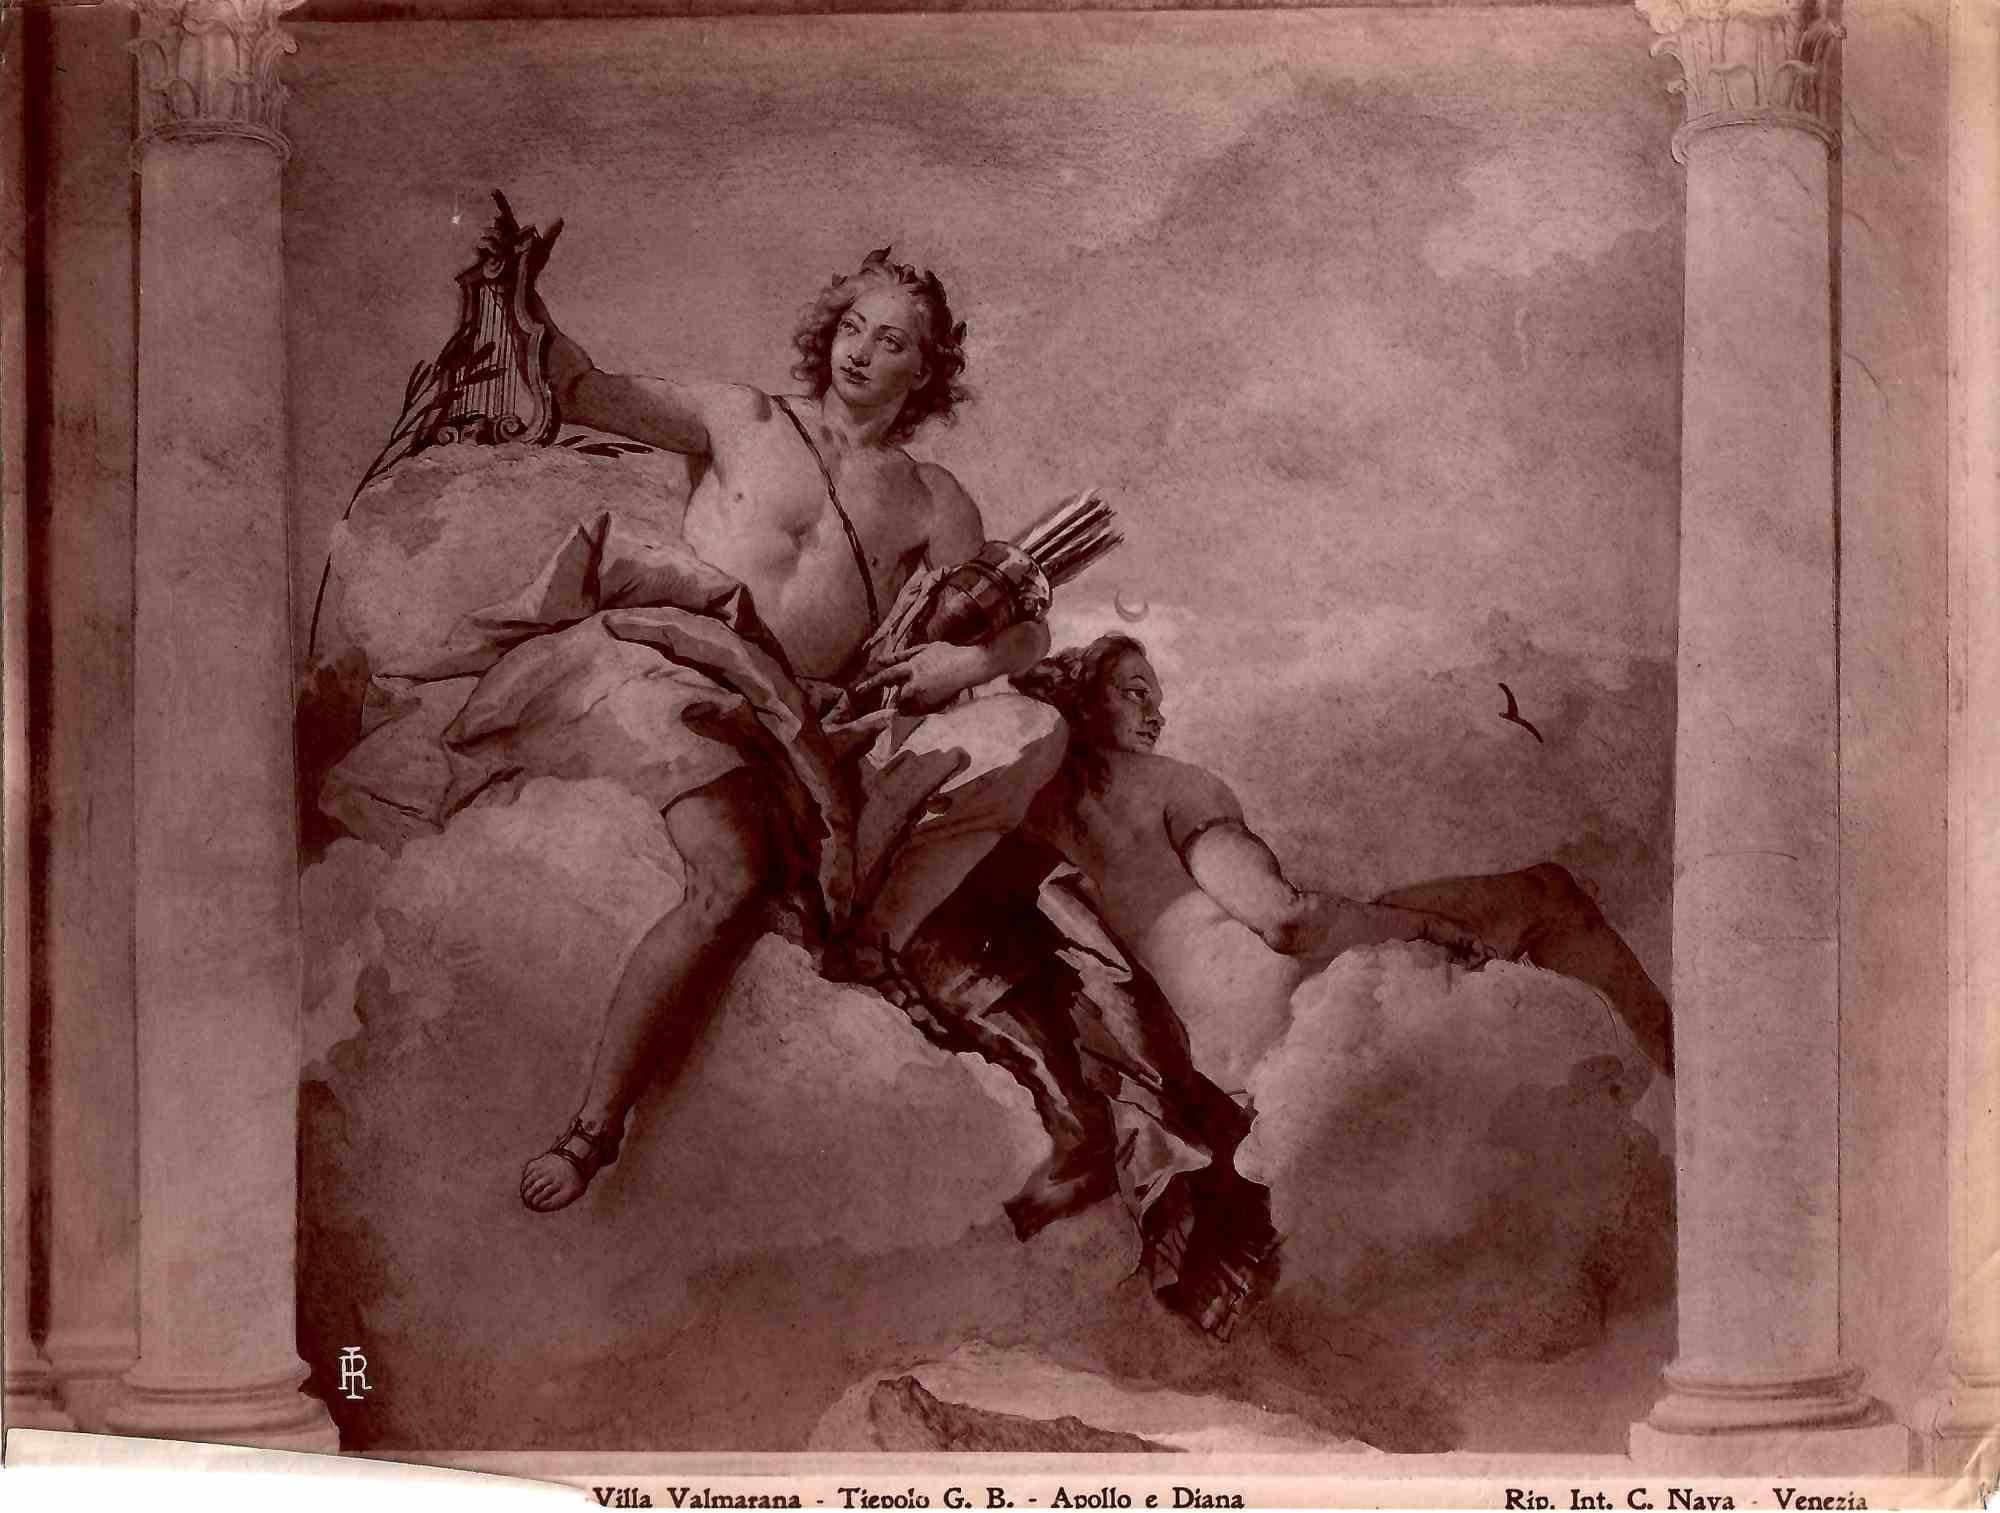 Unknown Black and White Photograph - Apollo and Diana - Vintage Photograph after Tiepolo - Early 20 Century